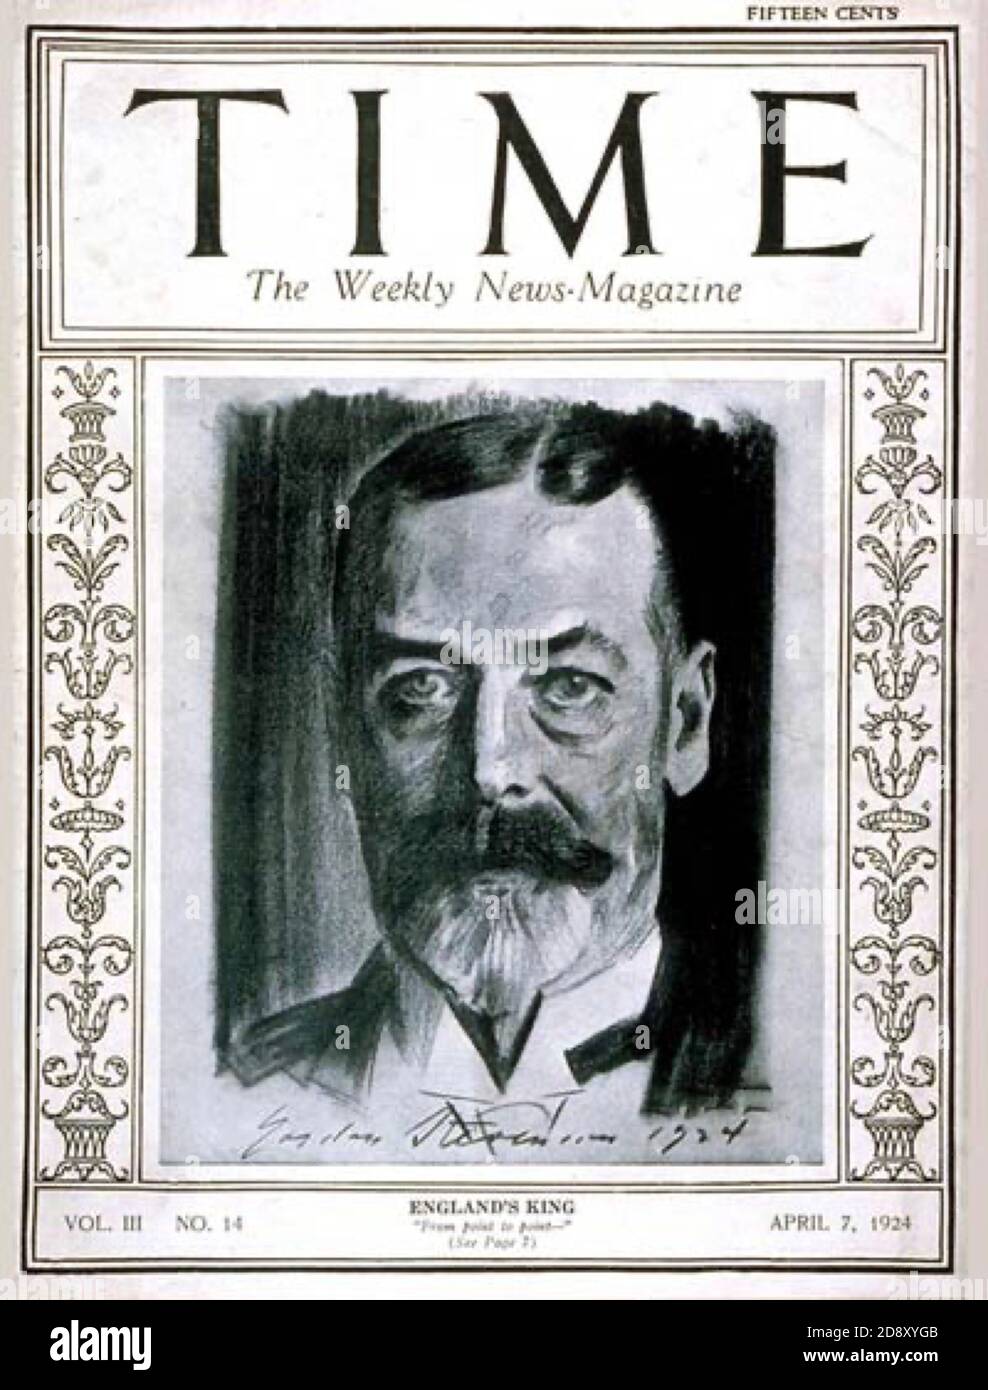 King George V portrait as featured on the front cover of Time magazine on the 7th April 1924. Stock Photo